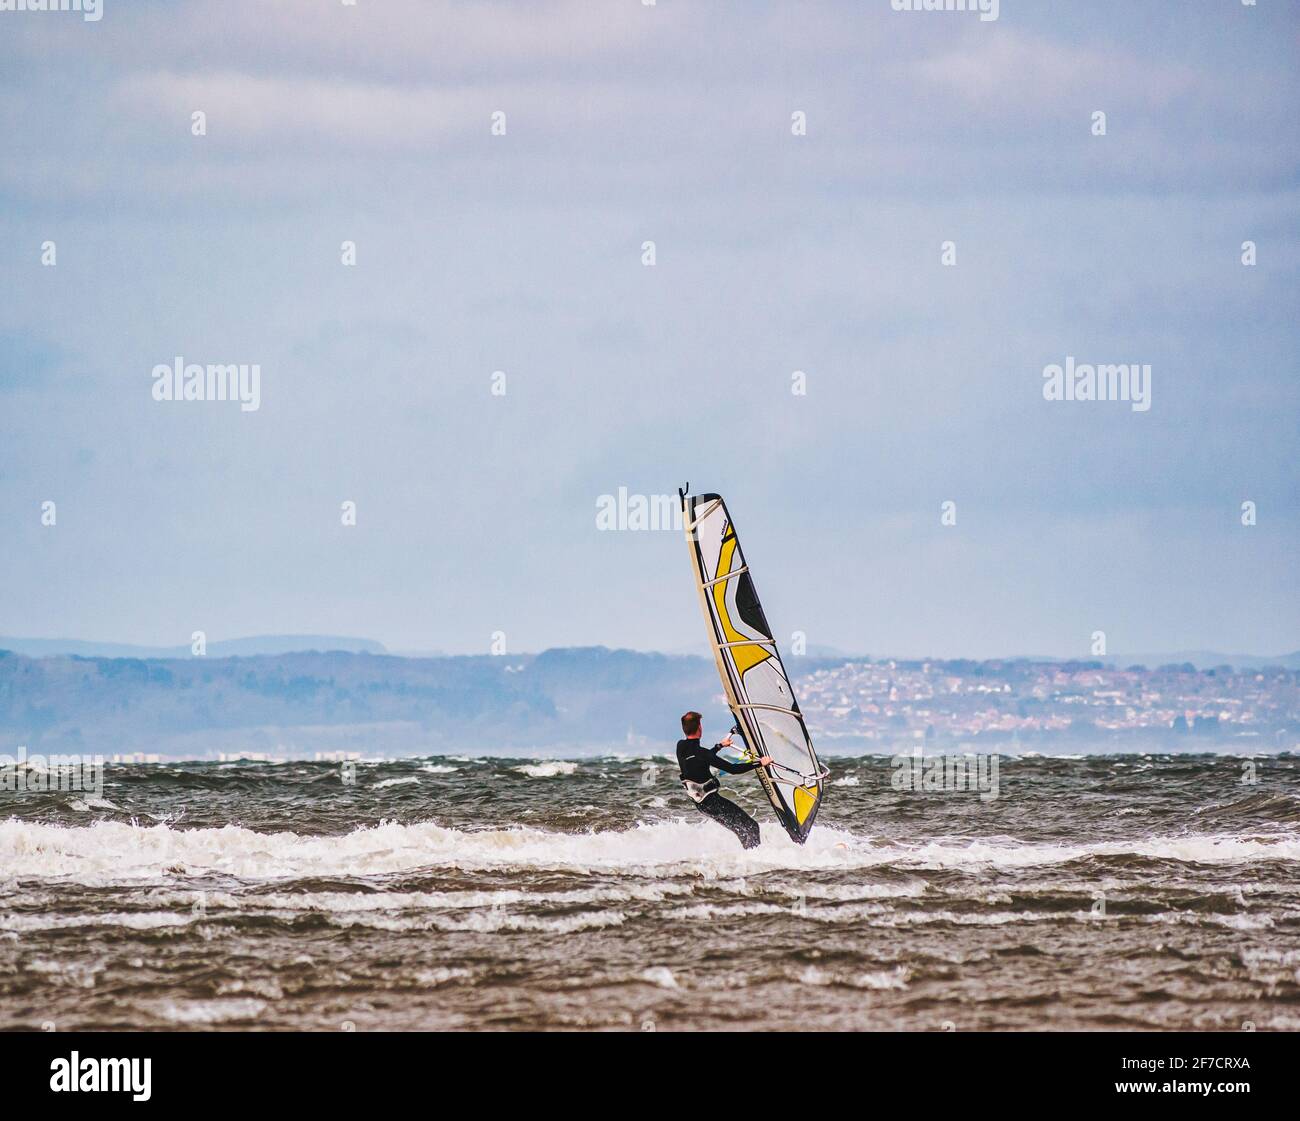 Man windsurfing at Longniddry Bents on windy day in choppy rough sea, Firth of Forth, Scotland, UK Stock Photo